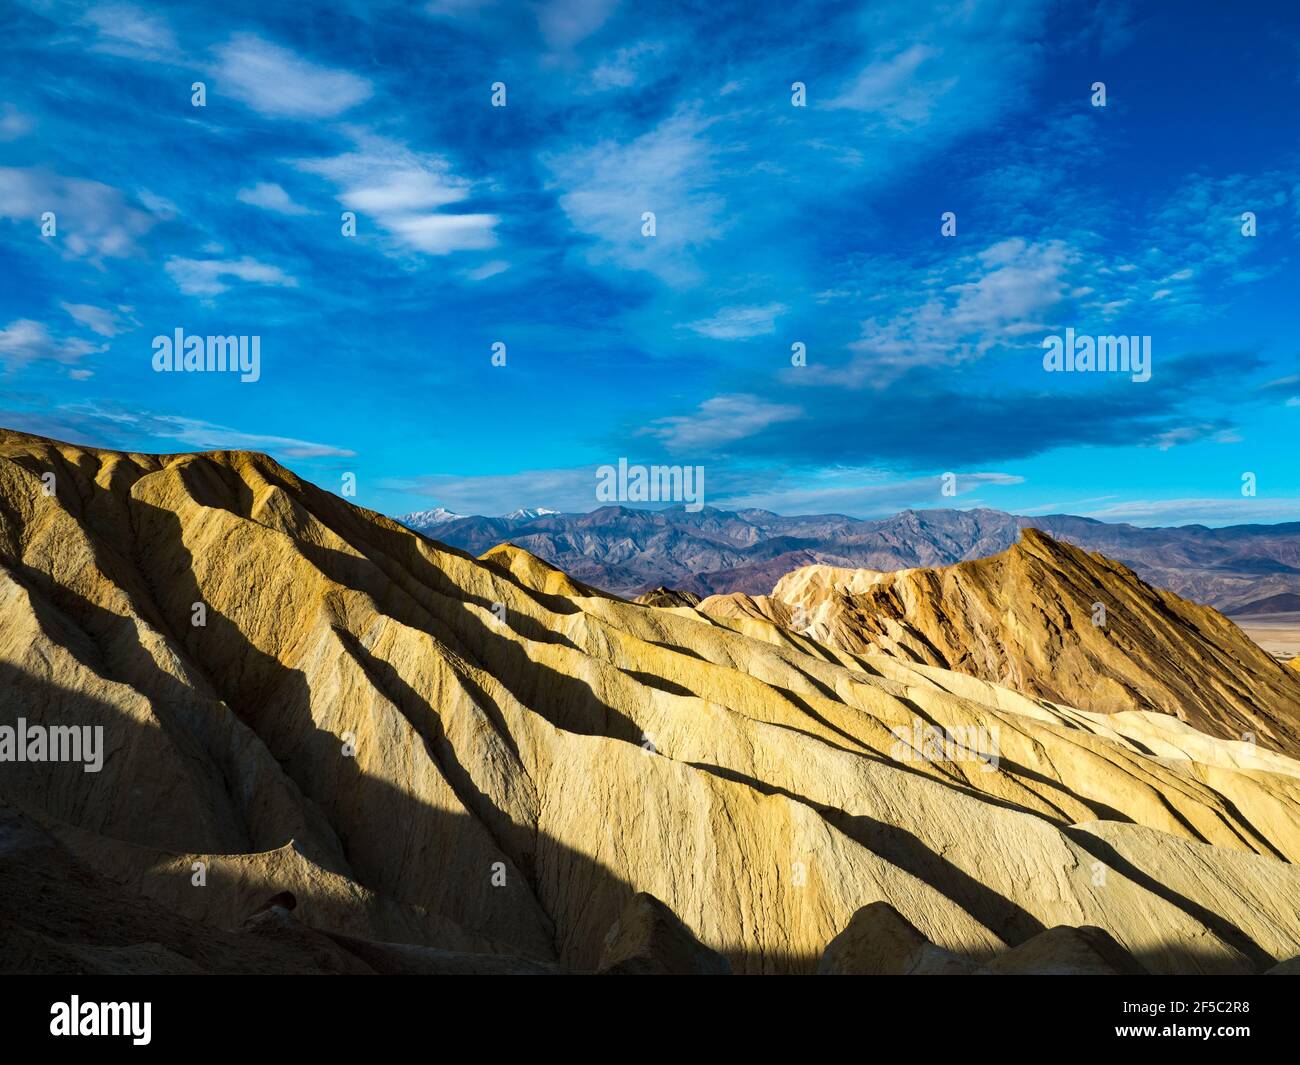 The stunning scenery of the badlands region near Zabriskie point in Death Valley National Park, California, USA Stock Photo